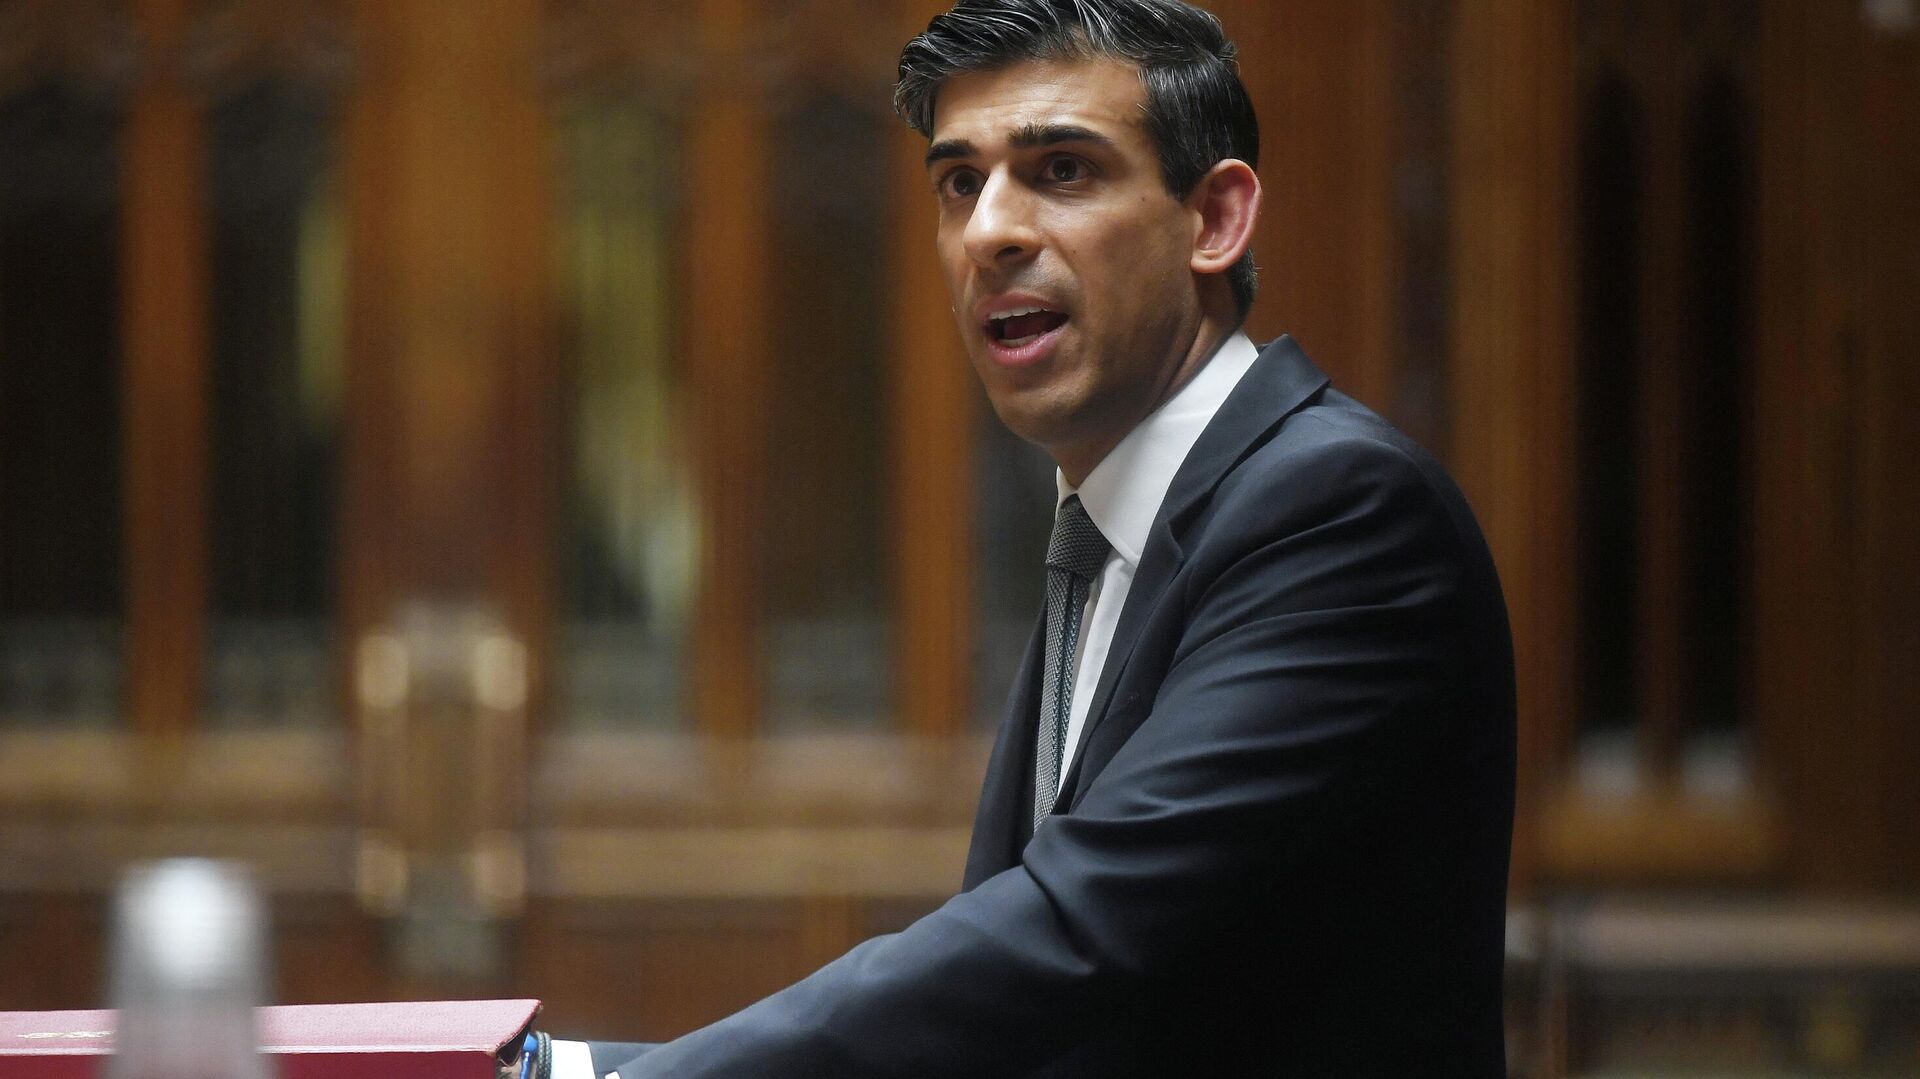 A handout photograph taken and released by the UK Parliament shows Britain's Chancellor of the Exchequer Rishi Sunak gesturing as he presents the Spring Budget statement to MPs at the House of Commons, in London, on March 23, 2022 - Sputnik International, 1920, 02.05.2022